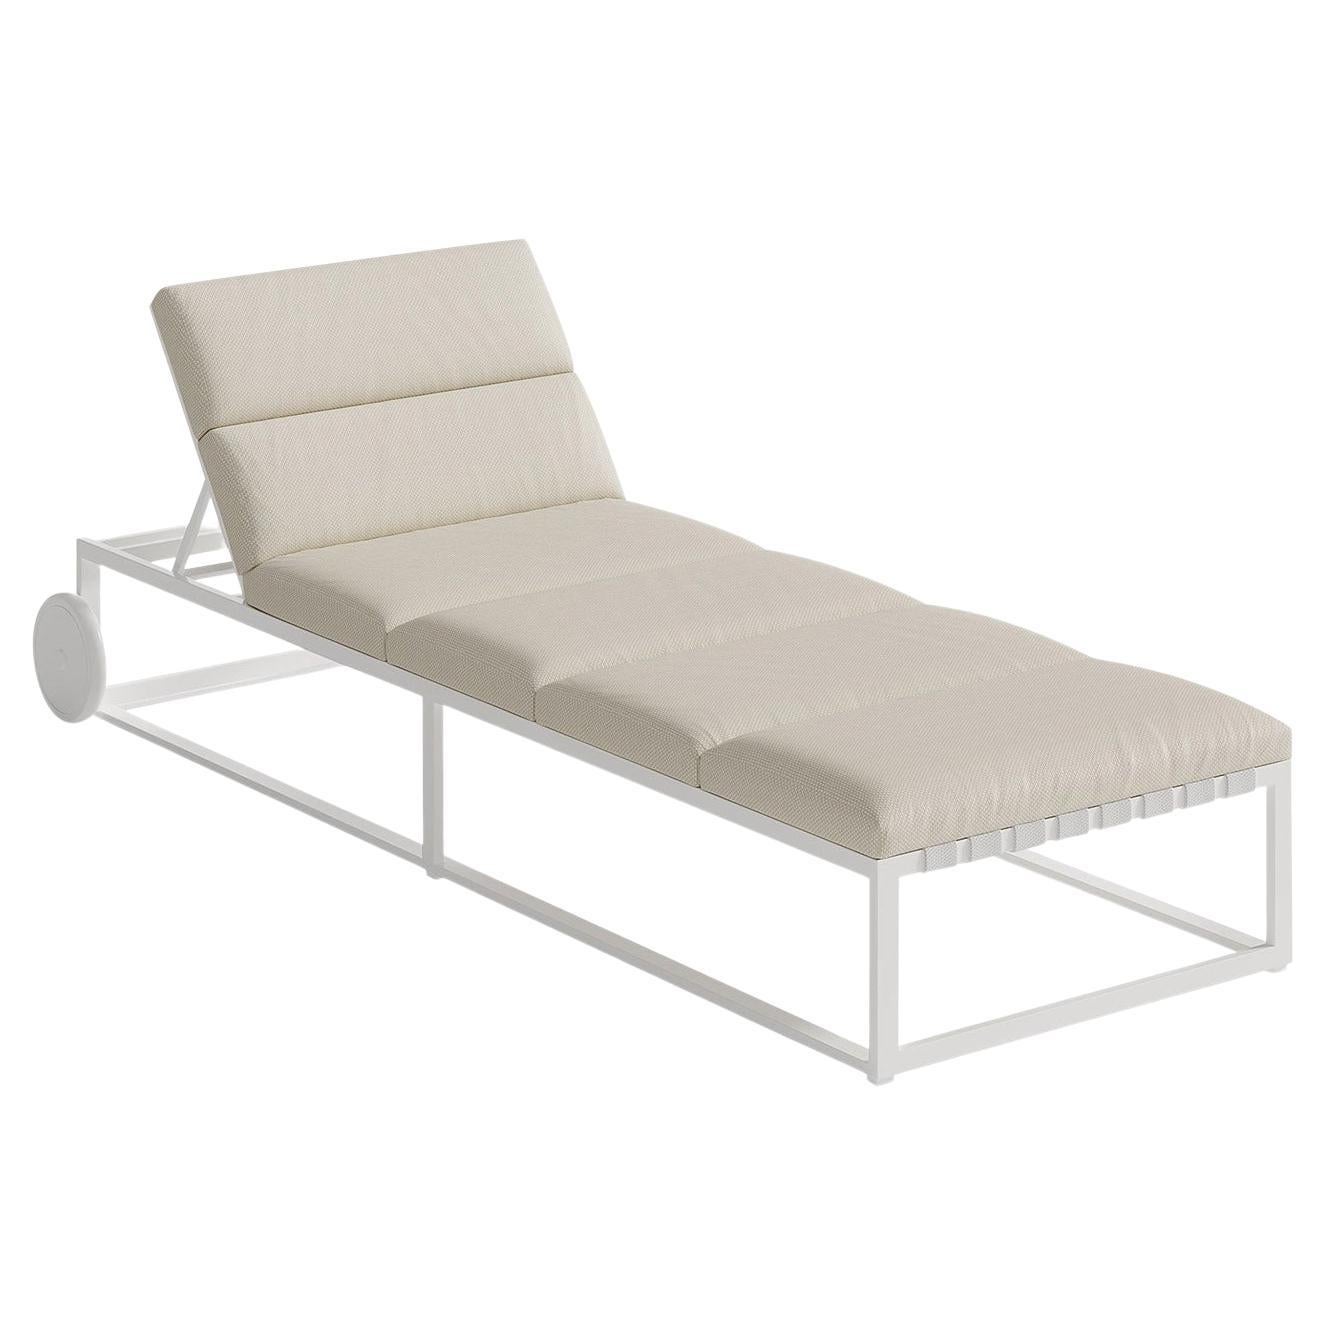 Braid Outdoor Chaise Longues